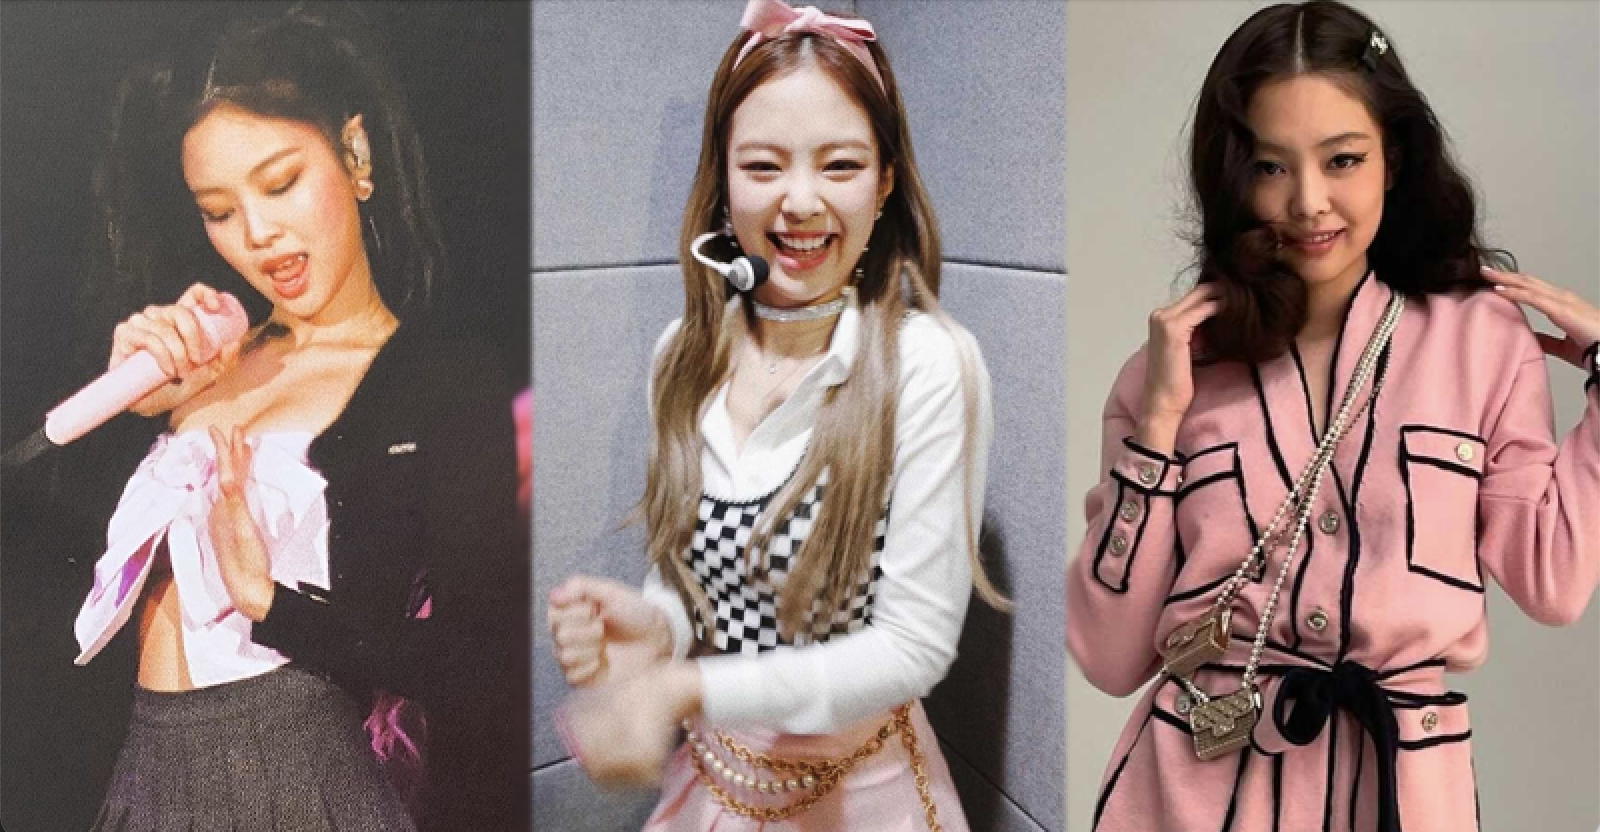 10+ Looks From BLACKPINK’s Jennie That Proves She Dominates The Preppy Style